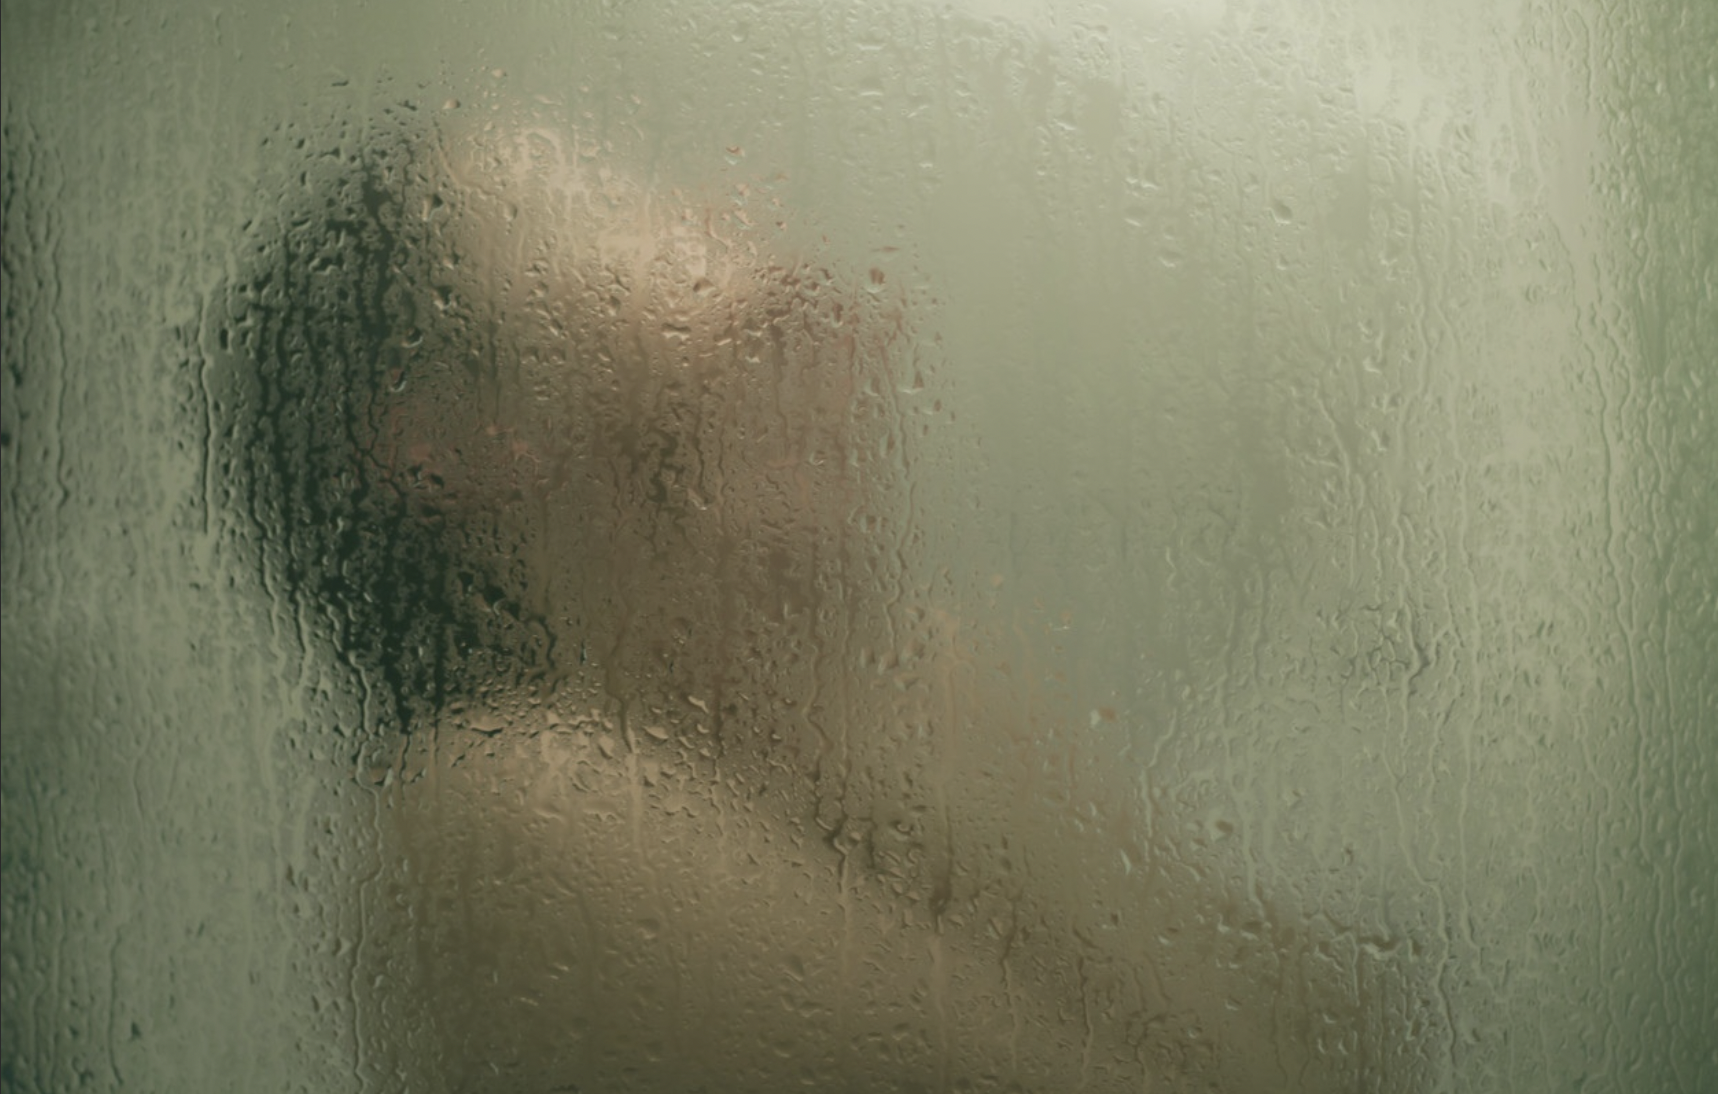 The woman in the shower | Source: Flickr